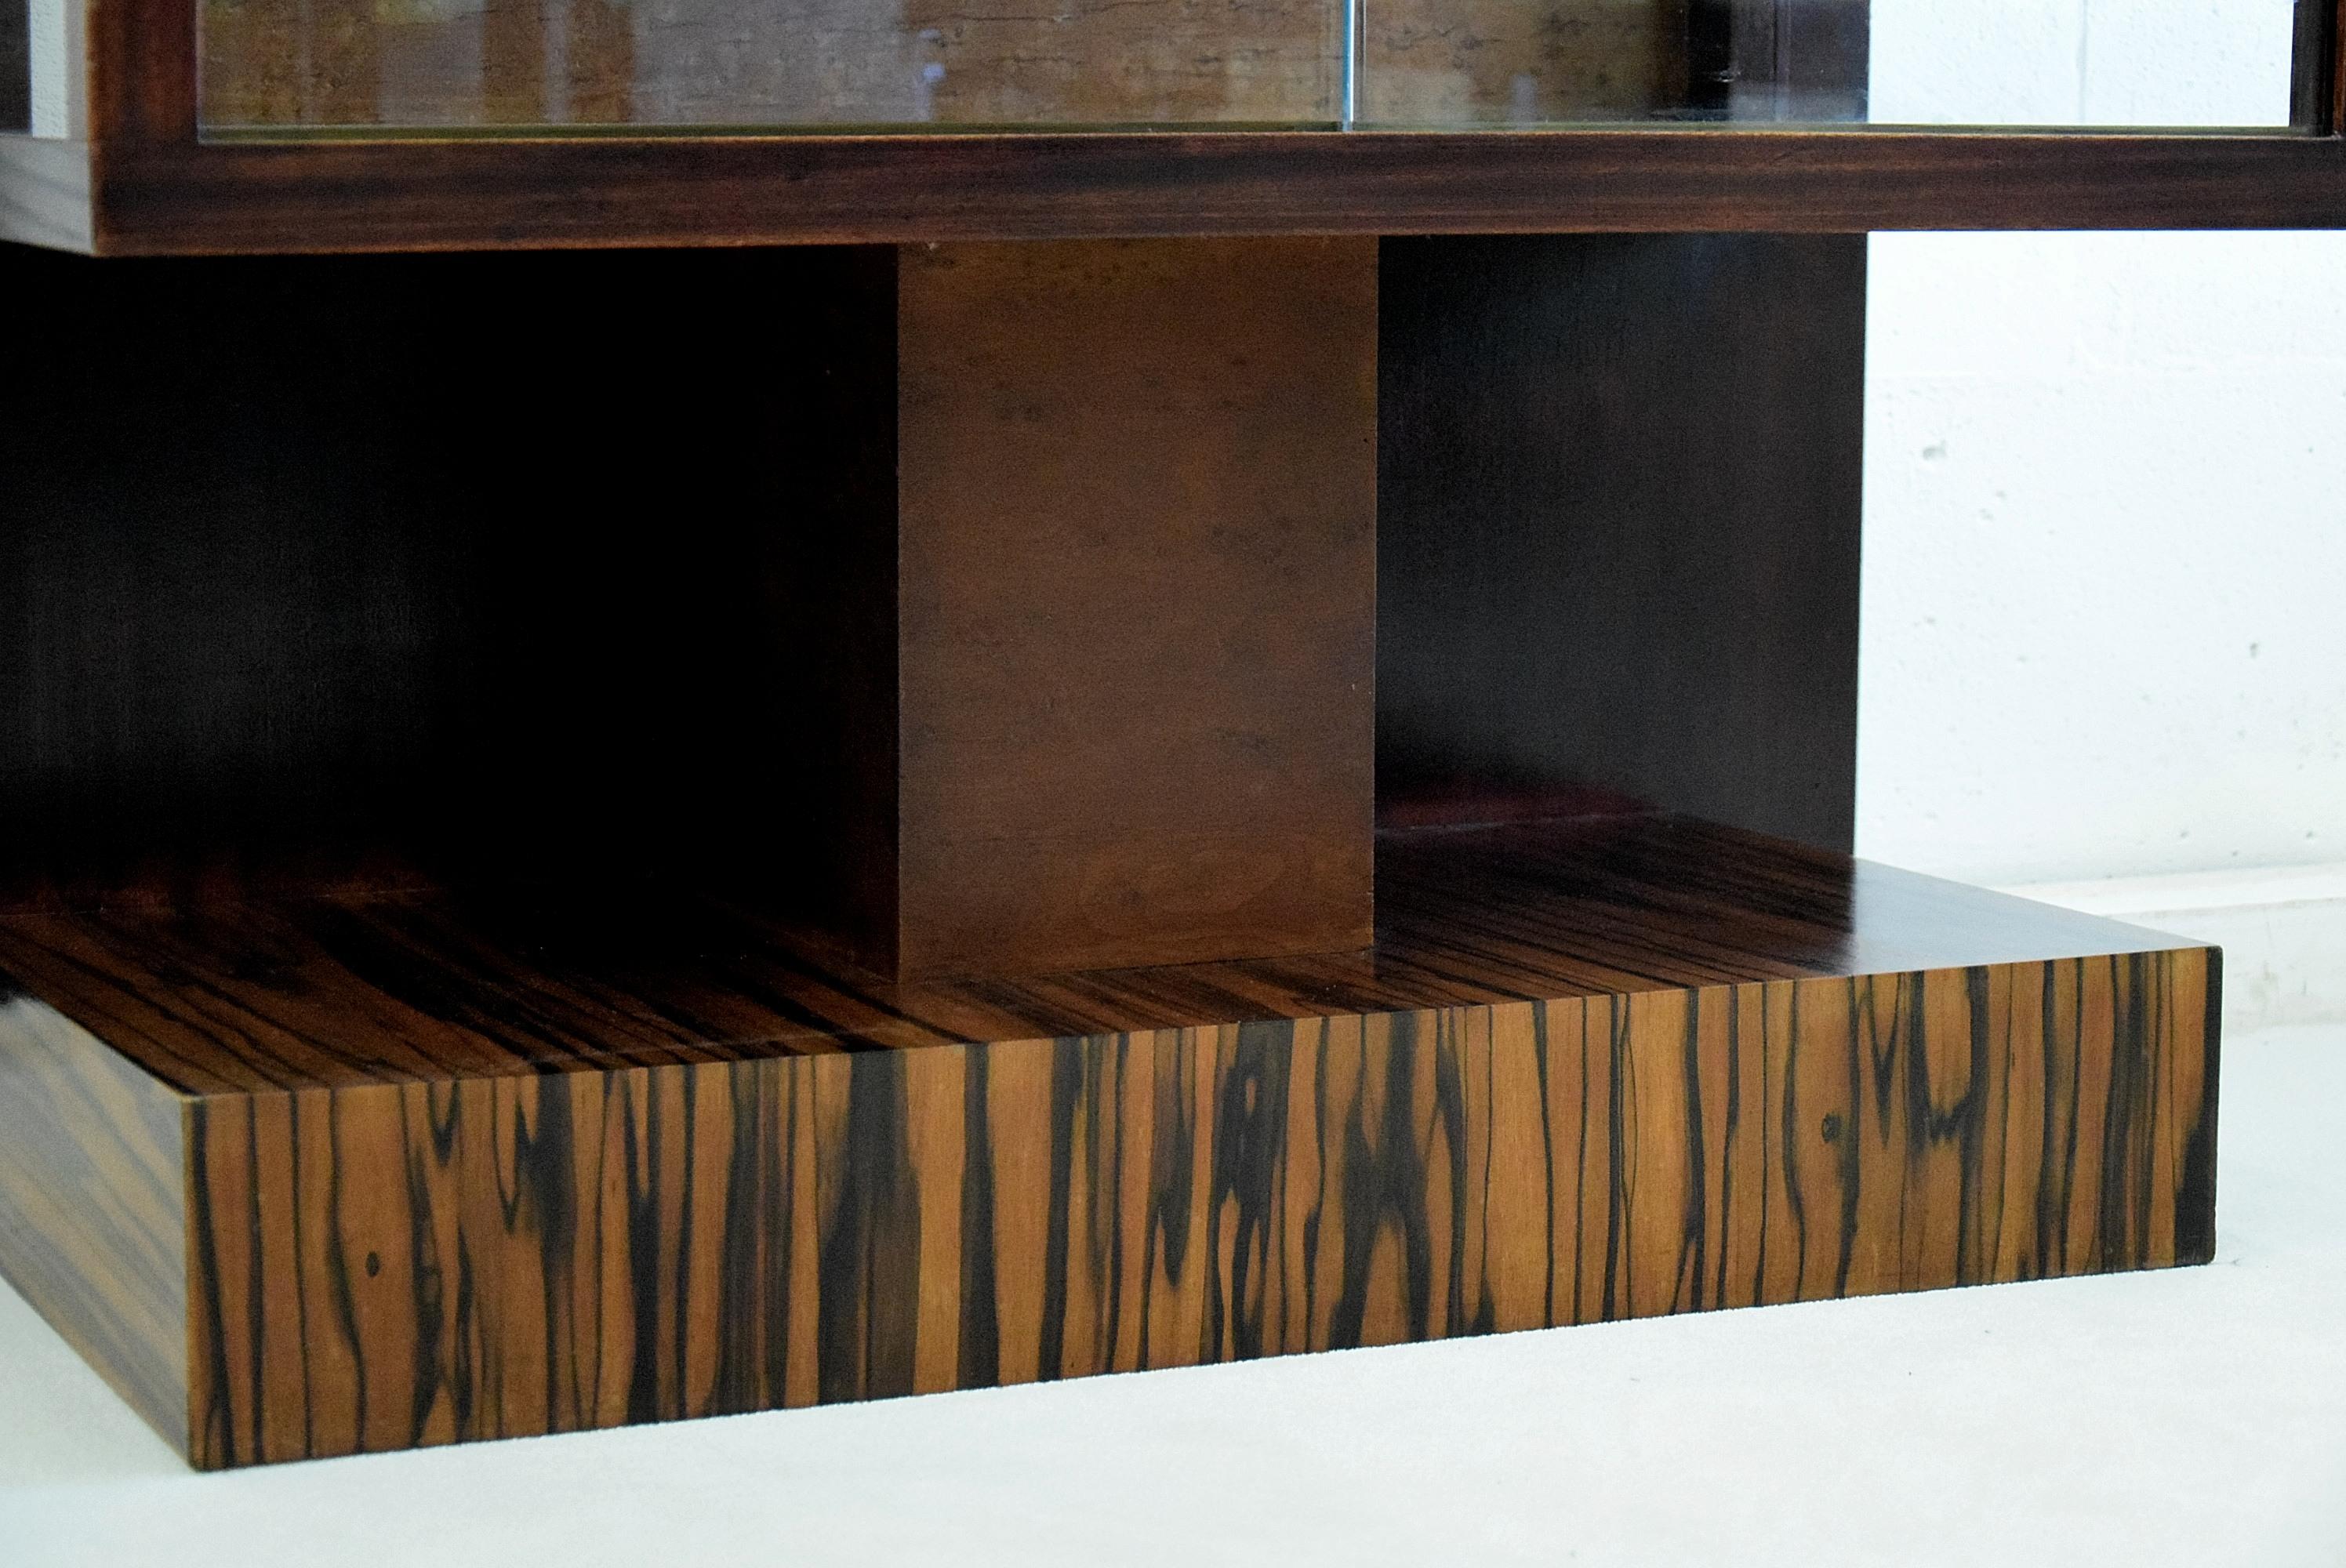 Tea cabinet Art Deco made of stained Jatoba wood. Designed by P.E.L. Izeren (1886-1943) and produced by de Genneper Molen, the Genneper Mill in 1930.

This stunning cabinet has a glass top and two glass sliding doors and is in great